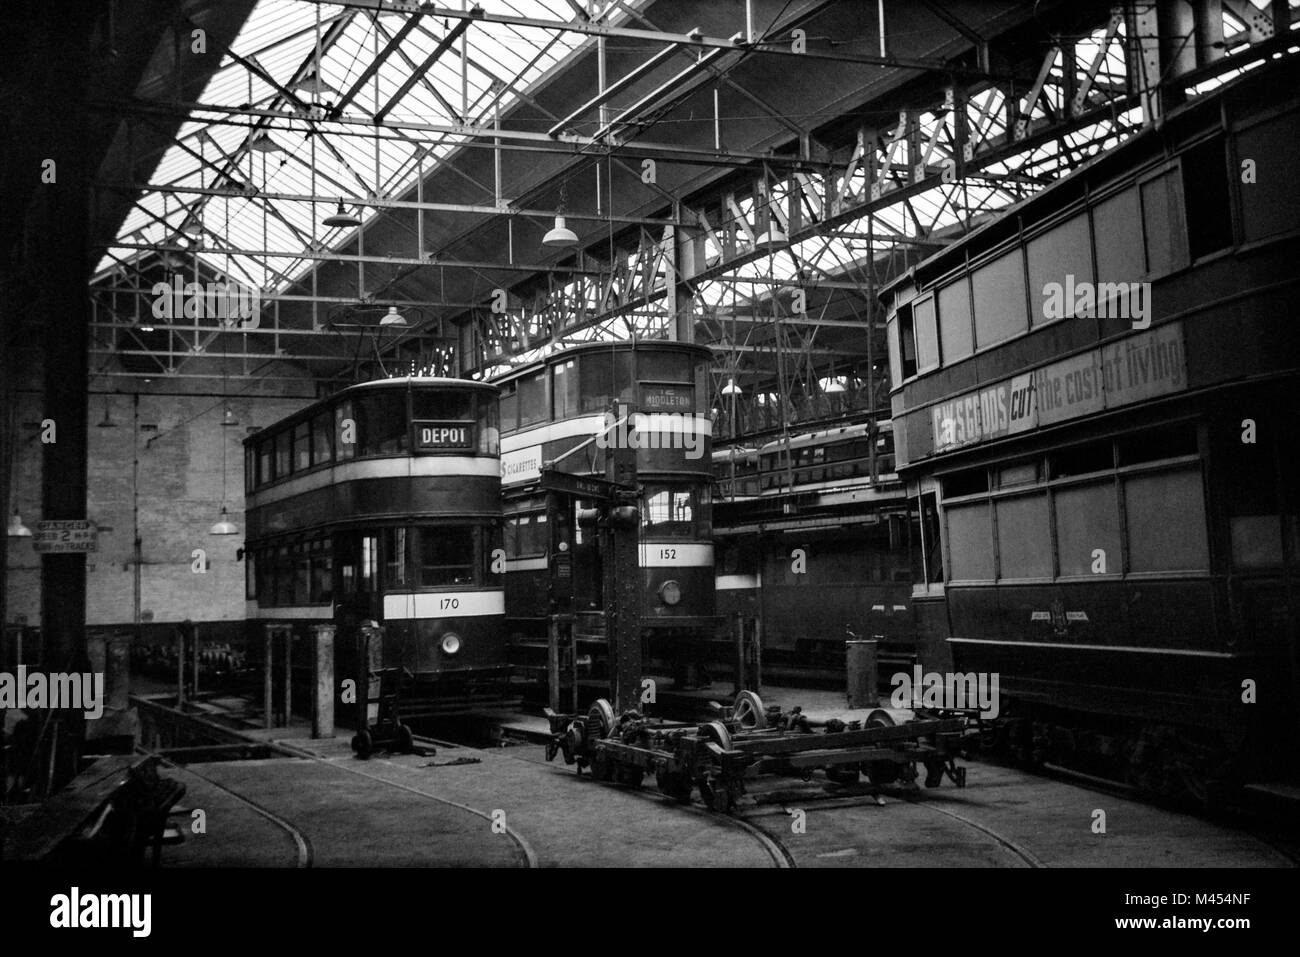 Leeds Corporation Trams 170 and 152 being repaired at possibly Swinegate Tram Shed, Leeds. Image taken in the 1950s Stock Photo